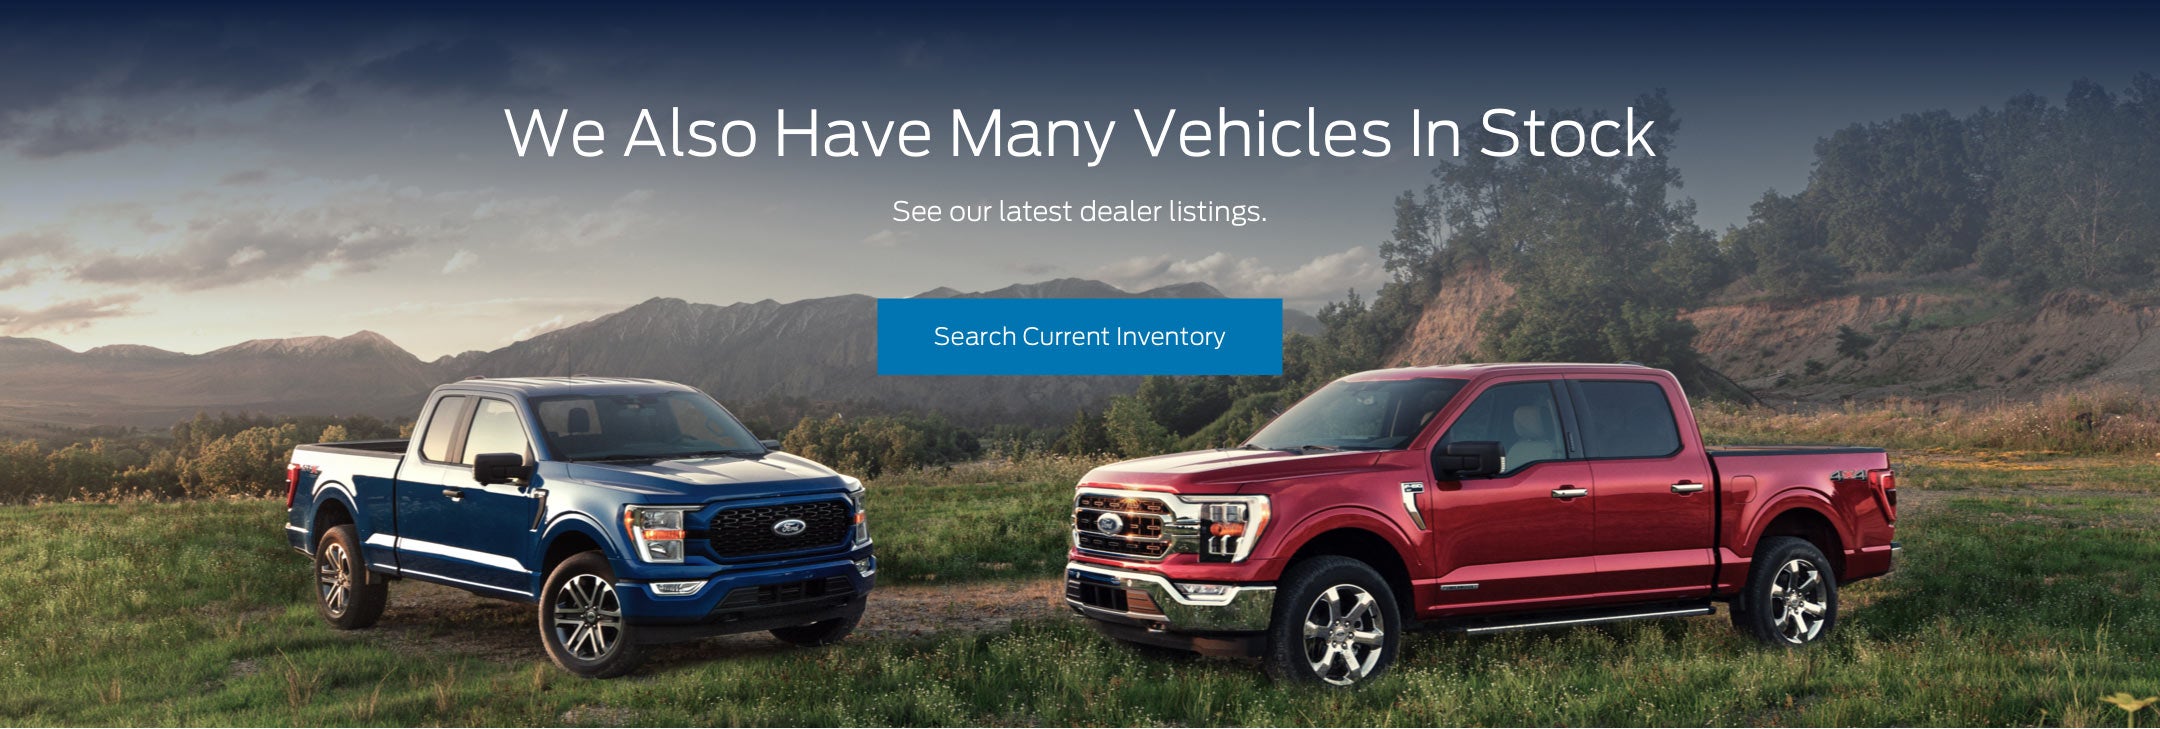 Ford vehicles in stock | Sam Galloway Ford in Fort Myers FL